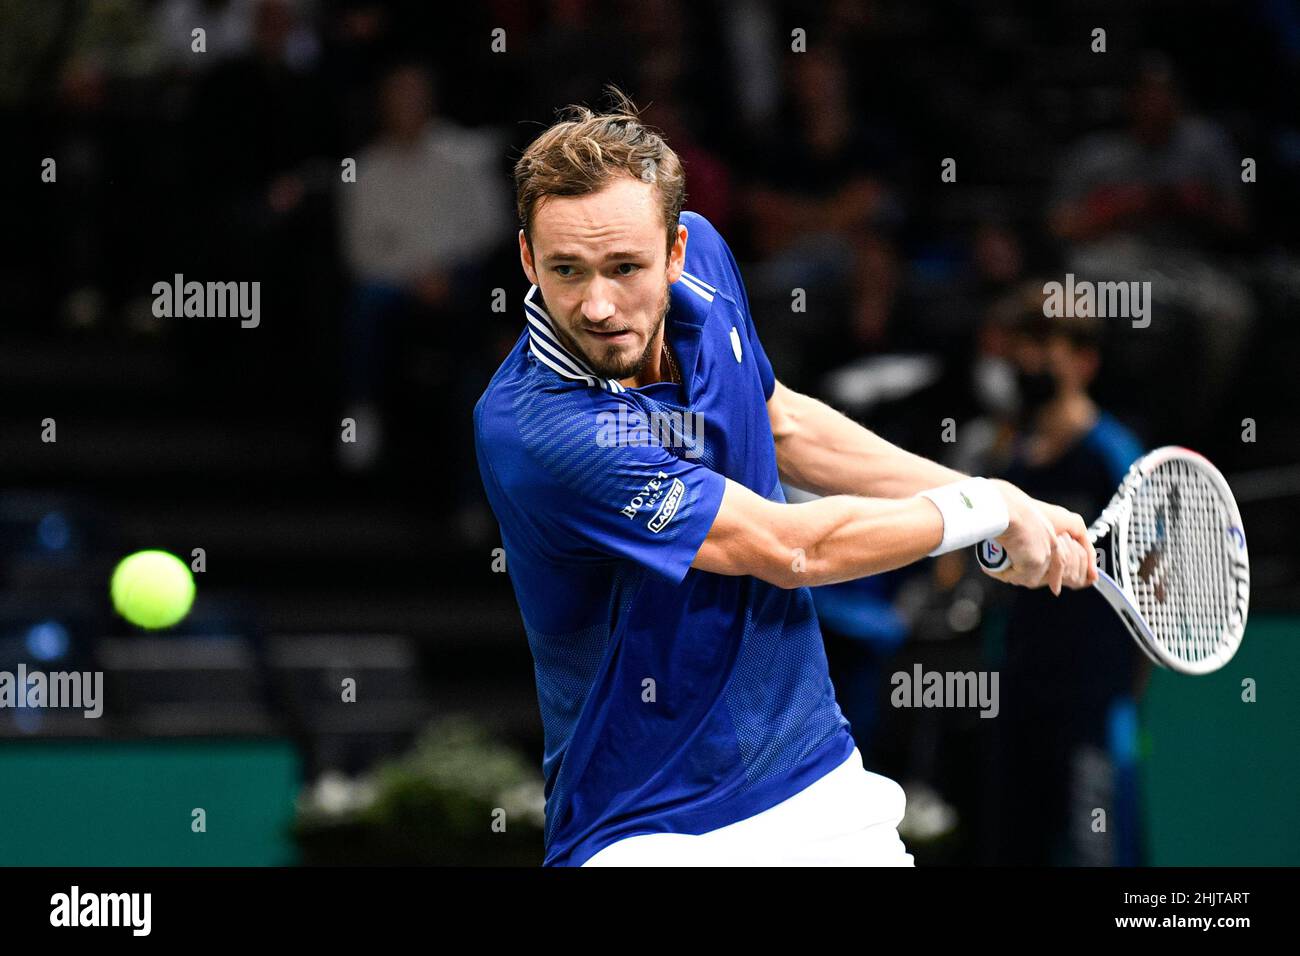 Daniil Medvedev of Russia during the Rolex Paris Masters, ATP Masters 1000 tennis tournament, on November 3, 2021 at Accor Arena in Paris, France. Stock Photo